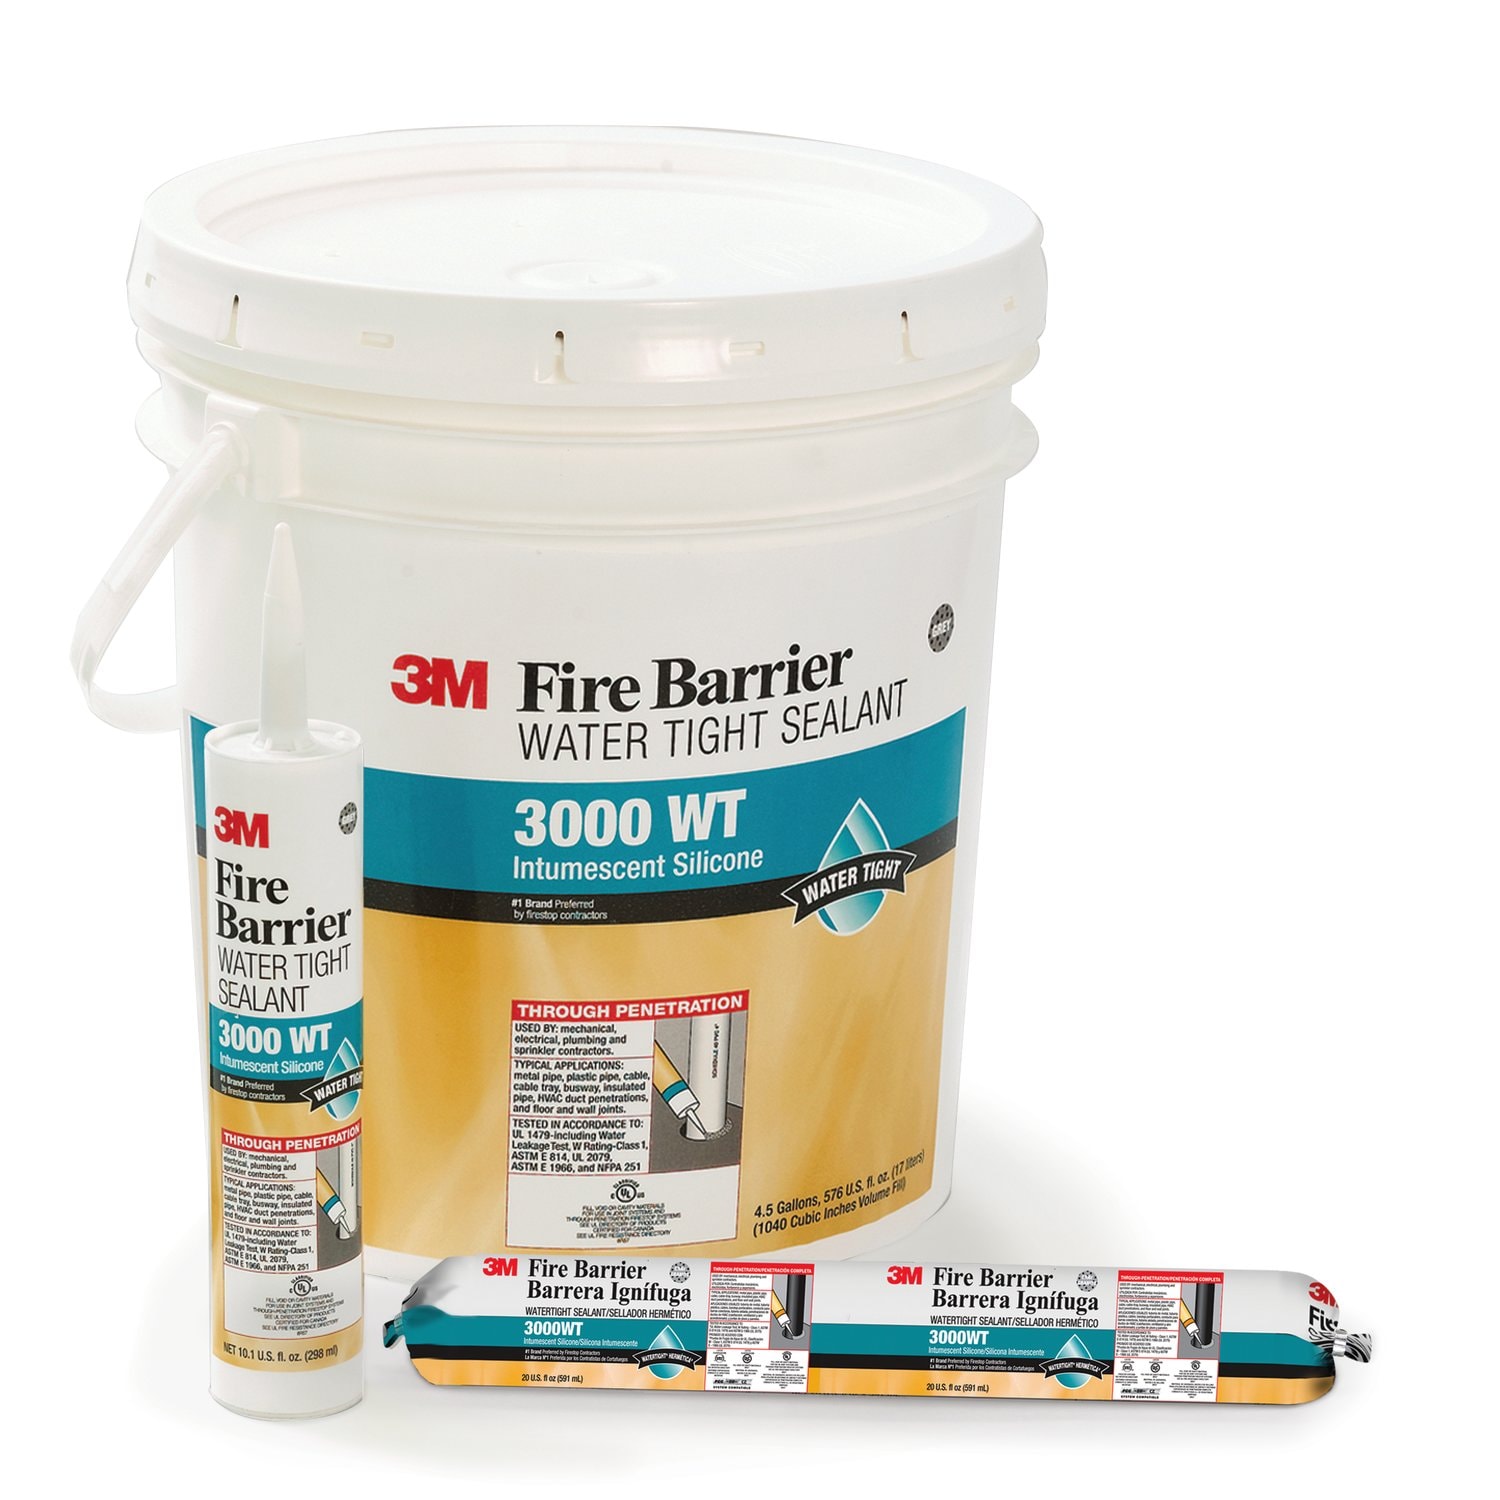 7000059413 - 3M Fire Barrier Water Tight Sealant 3000WT, Gray, 20 fl oz Sausage
Pack, 12 Each/Case